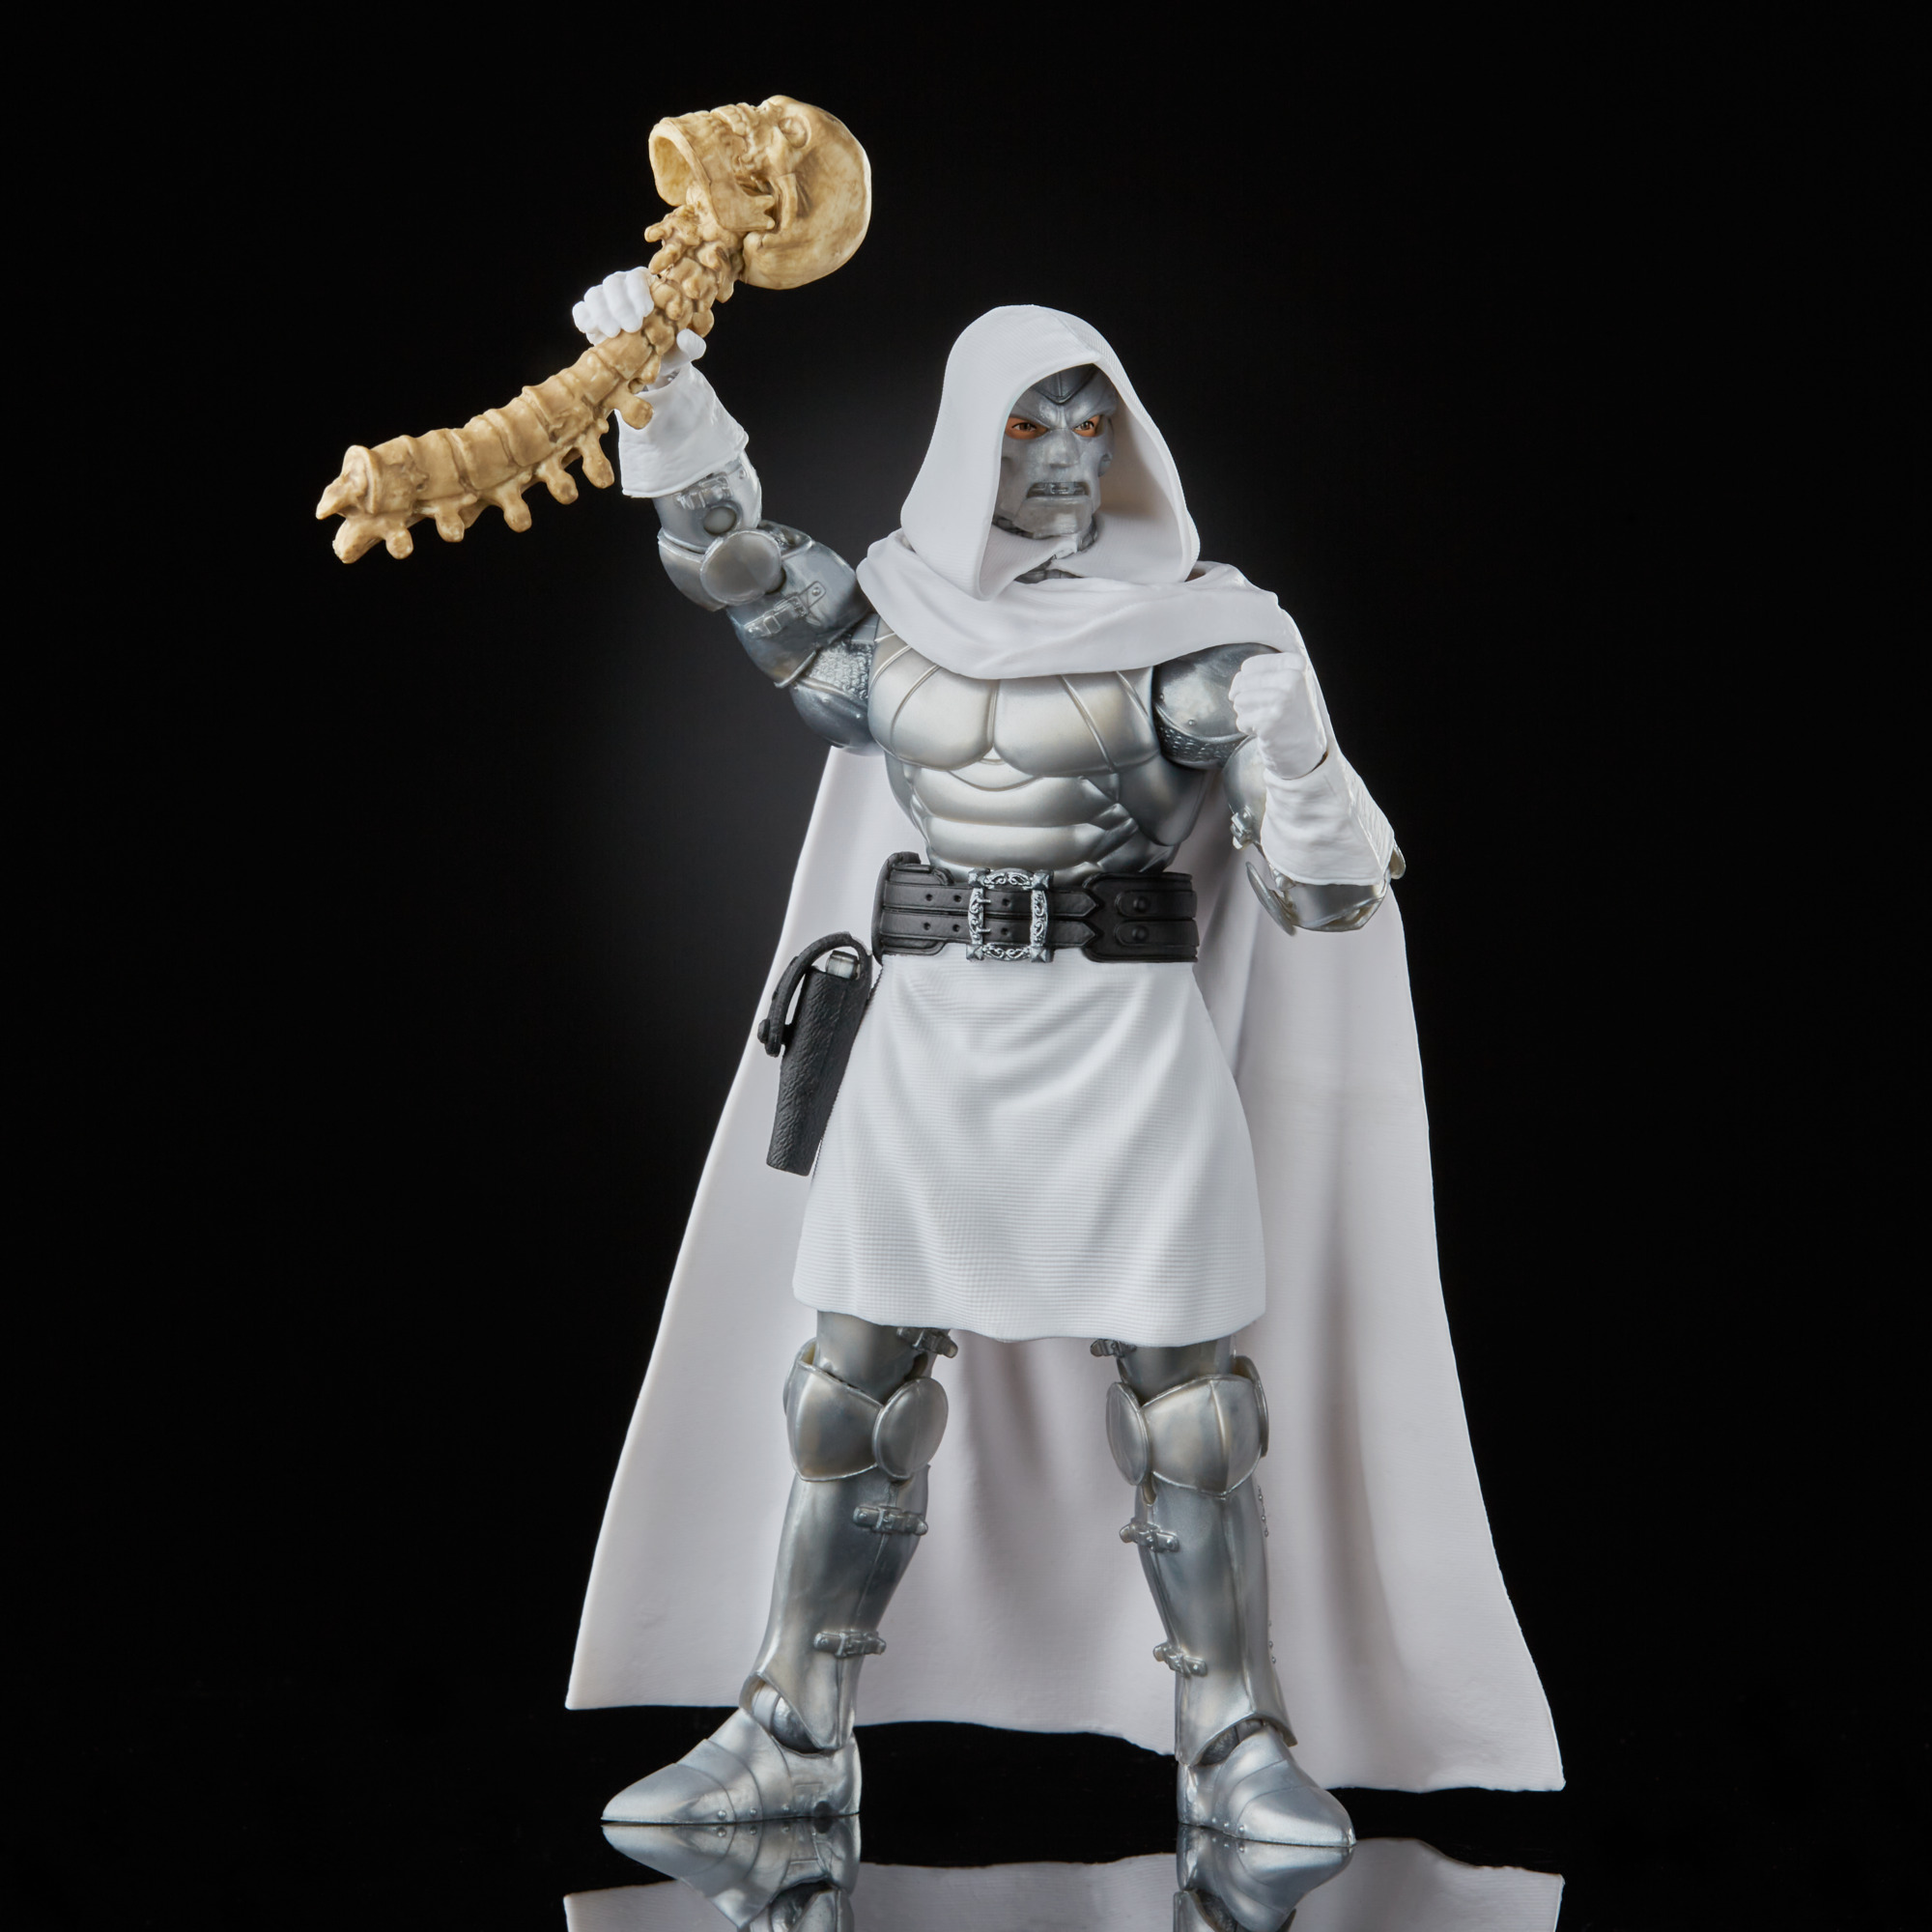 Hasbro Fan First Friday: Marvel Legends Cosmic and Villain wave figures revealed!